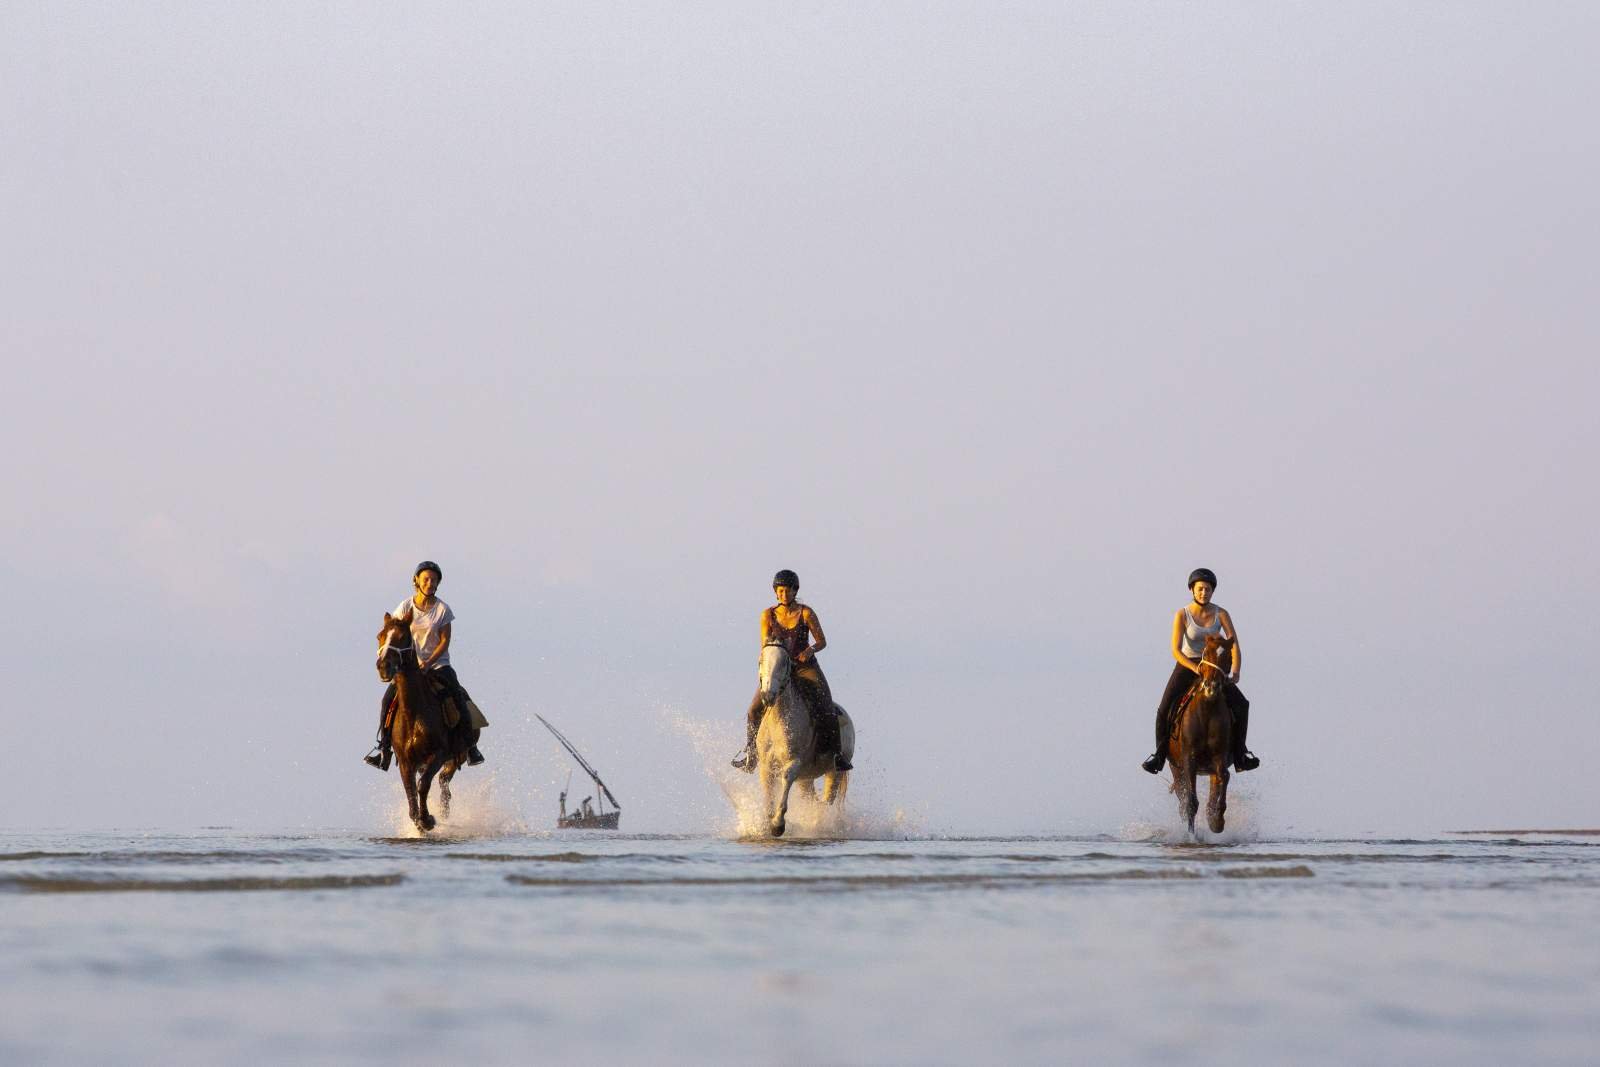 Three horses galloping in water